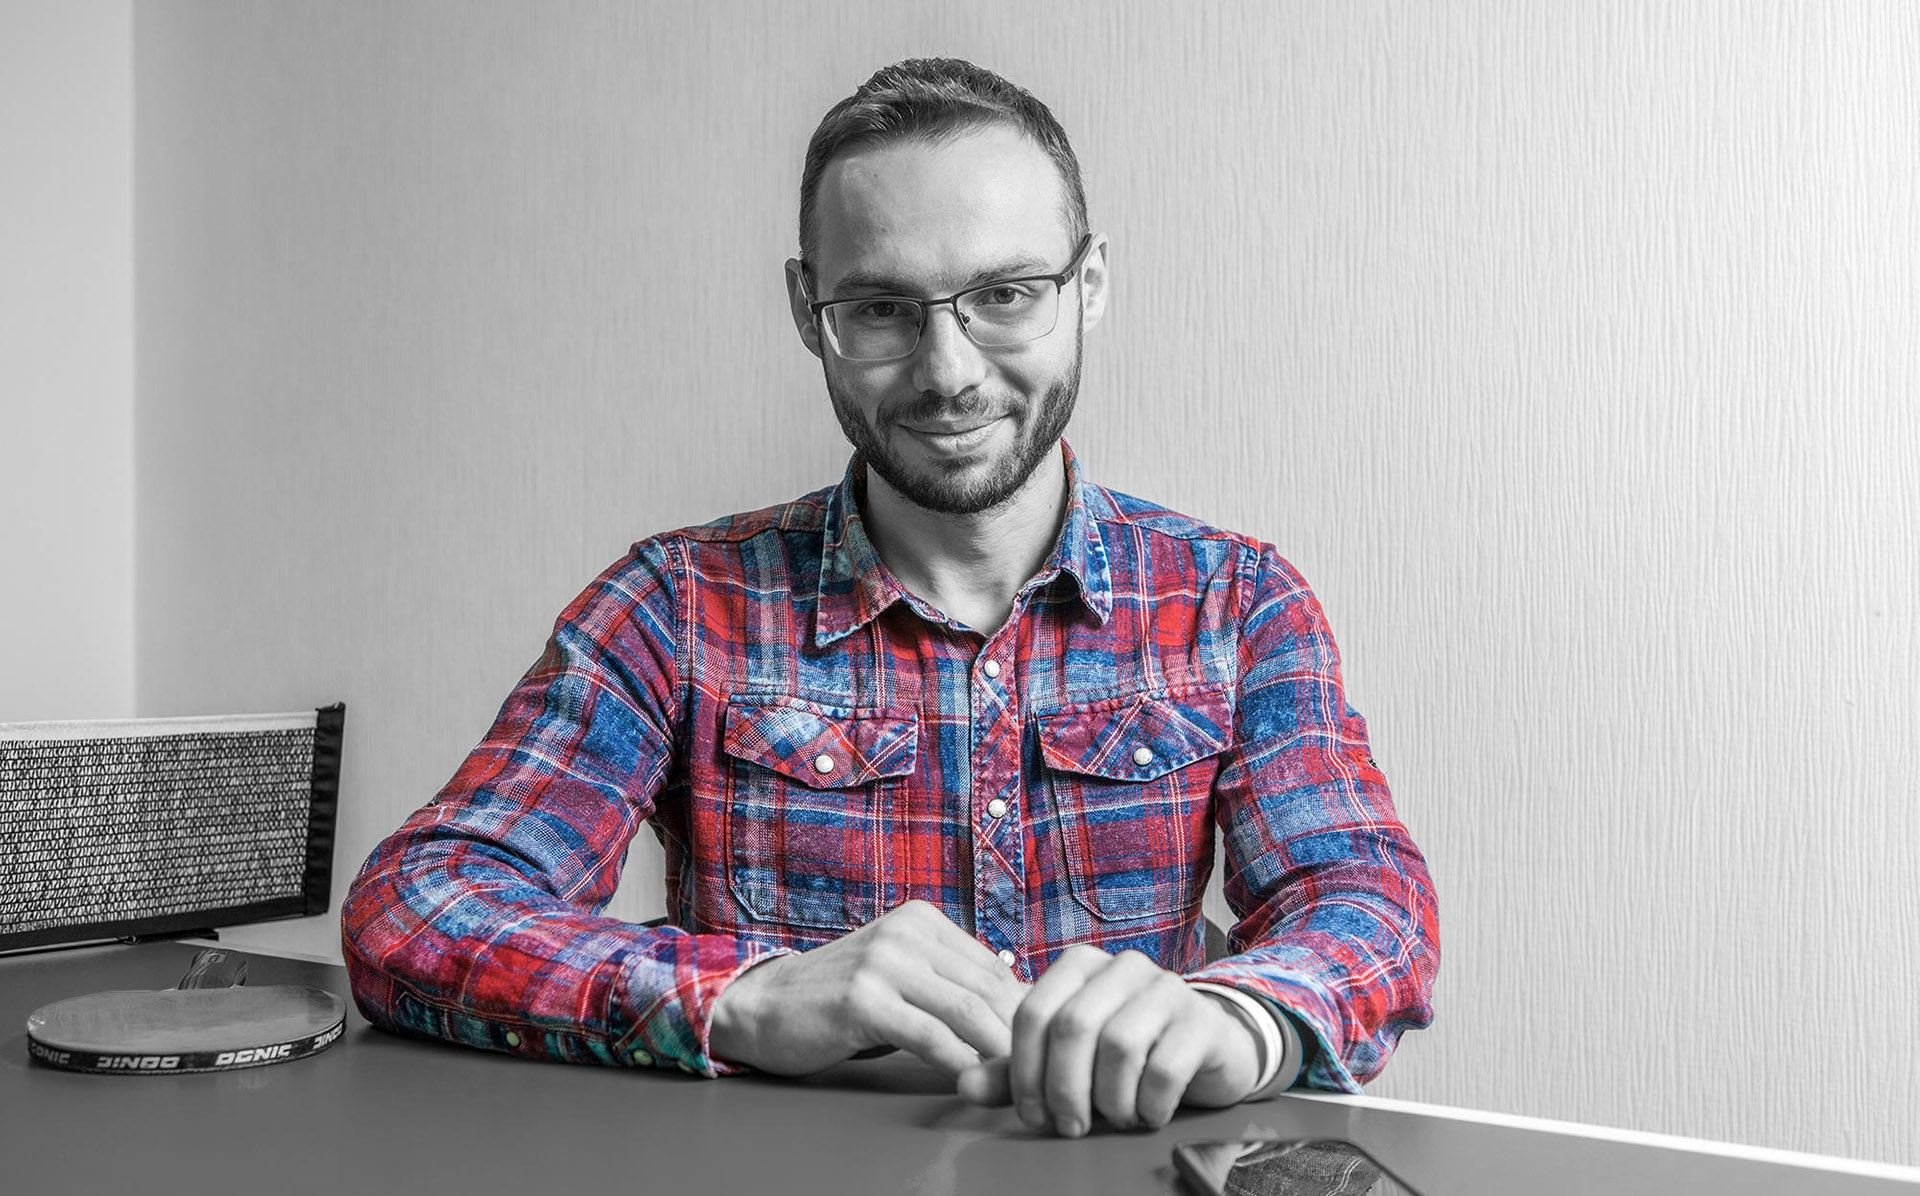 “For me, the state is us - people who are interested or not interested in changes,” Sergey Milman, founder and CEO of YouControl